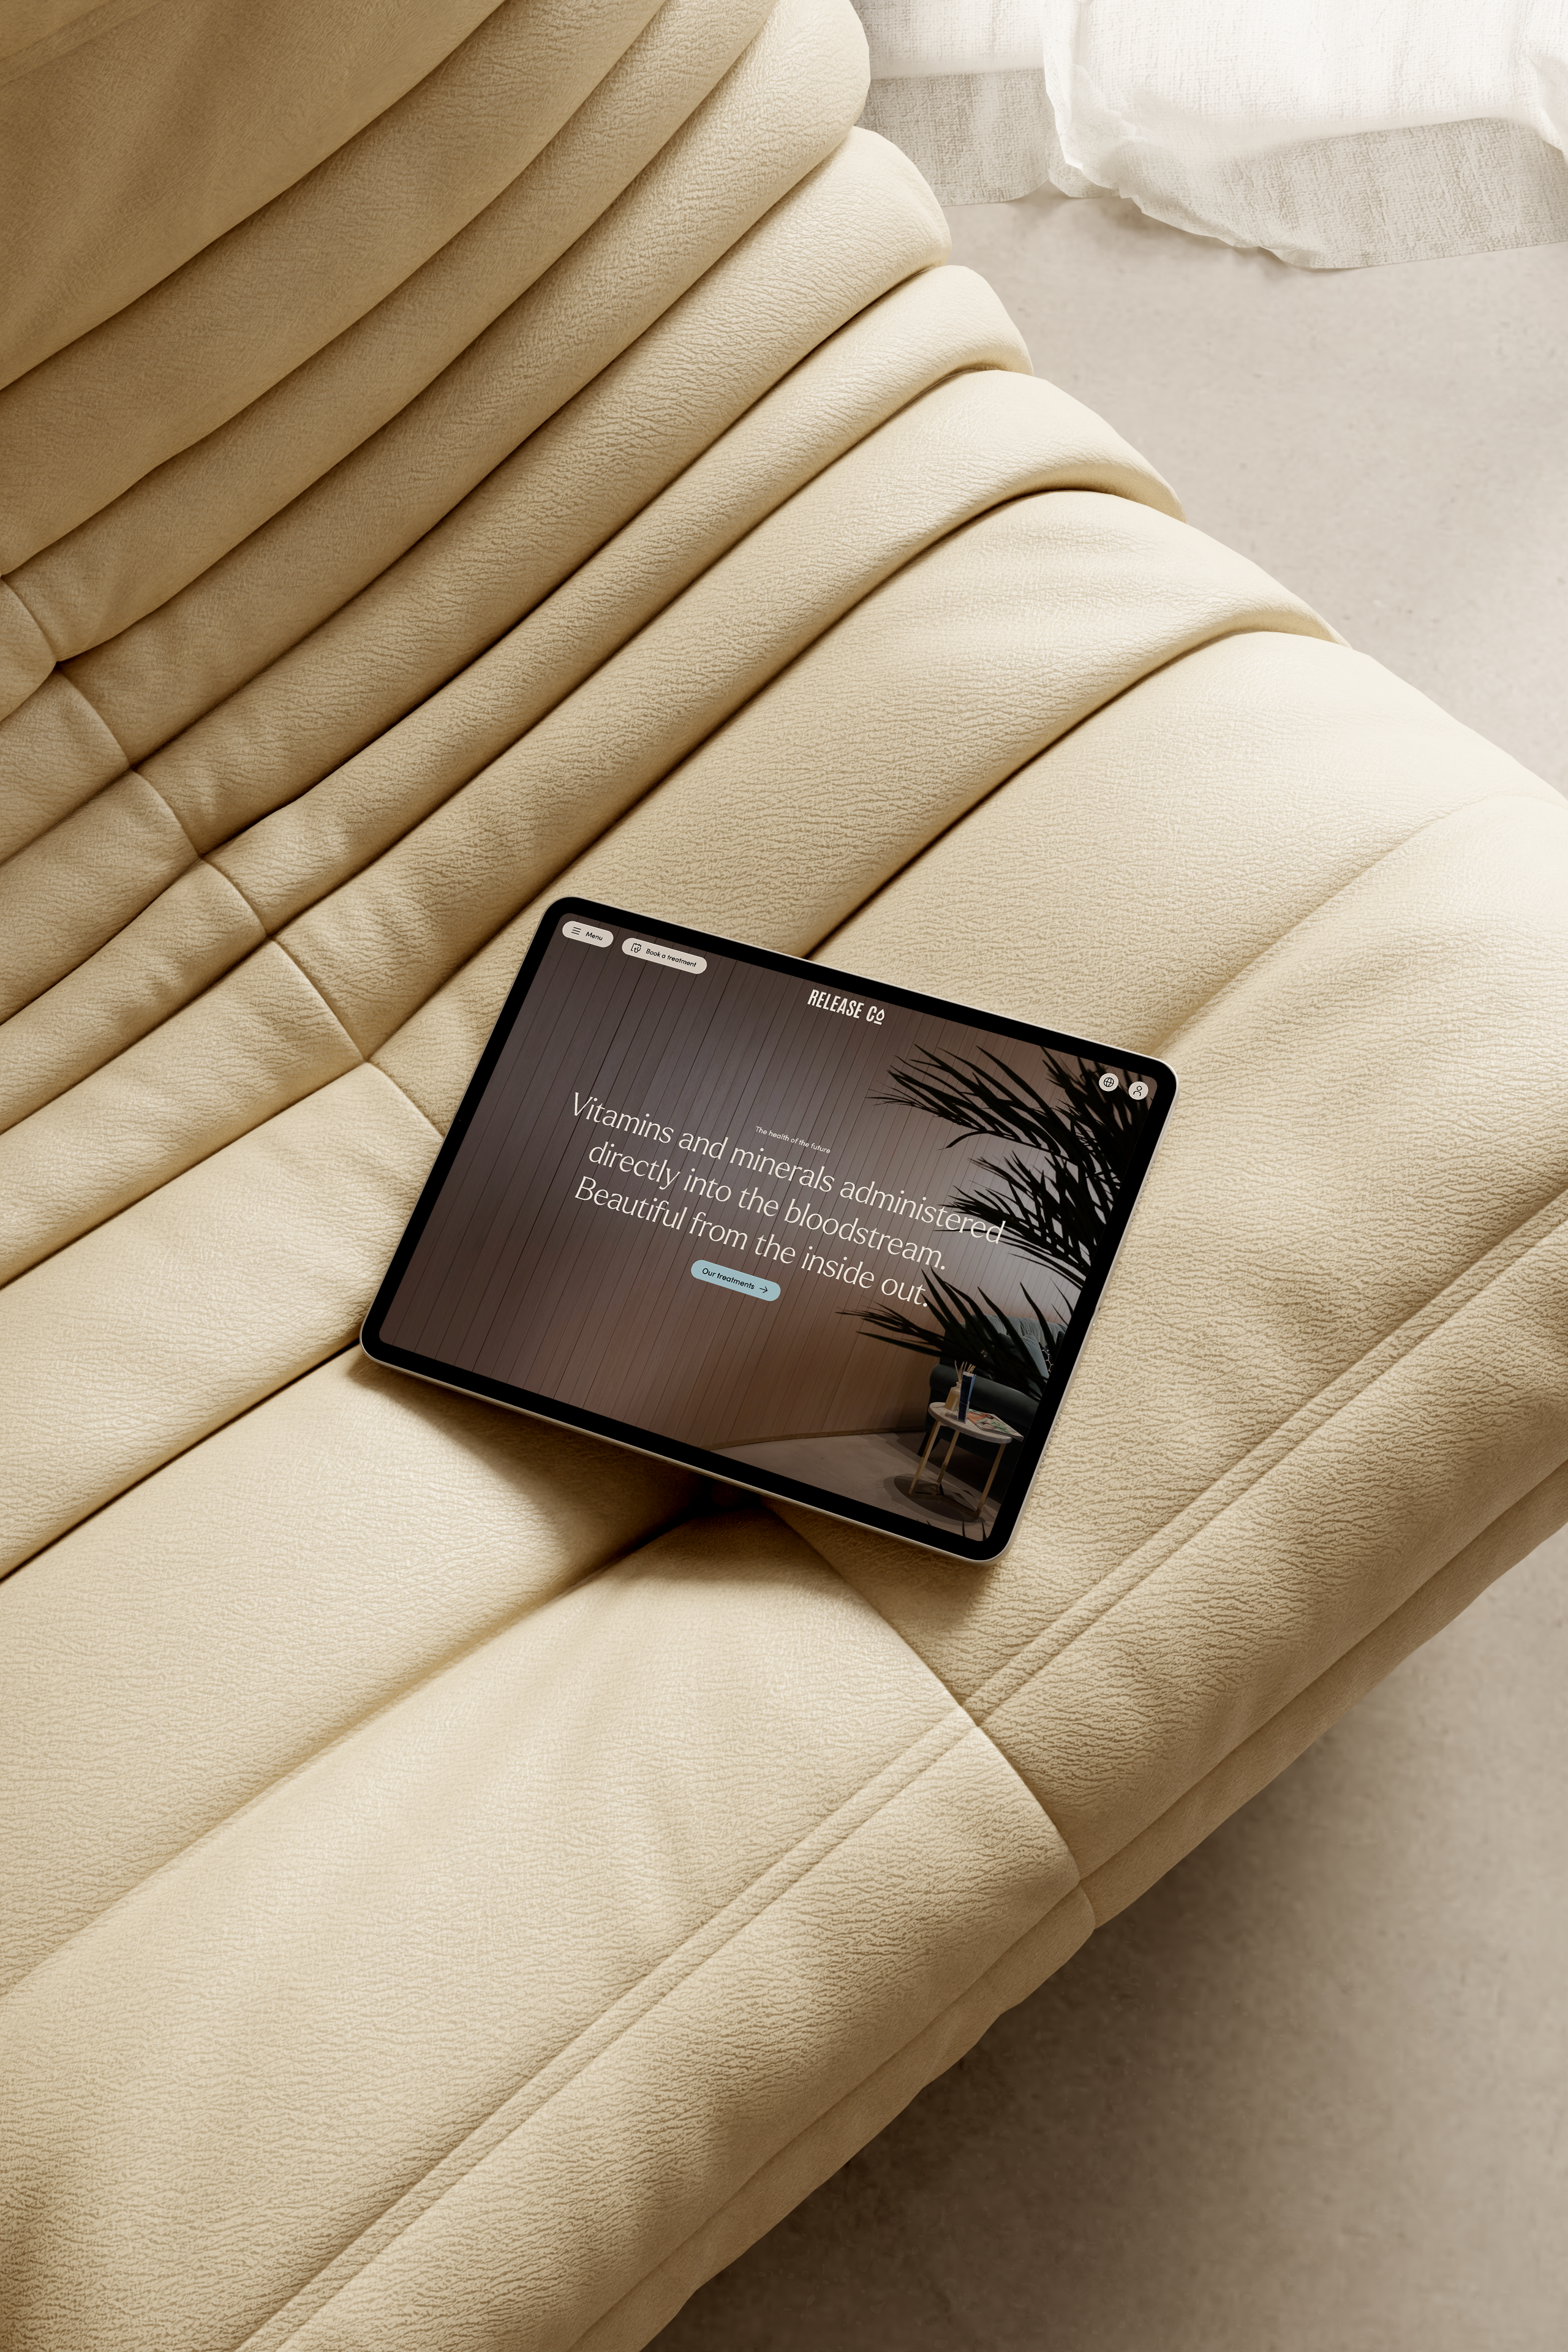 Release Co Tablet on a sofa